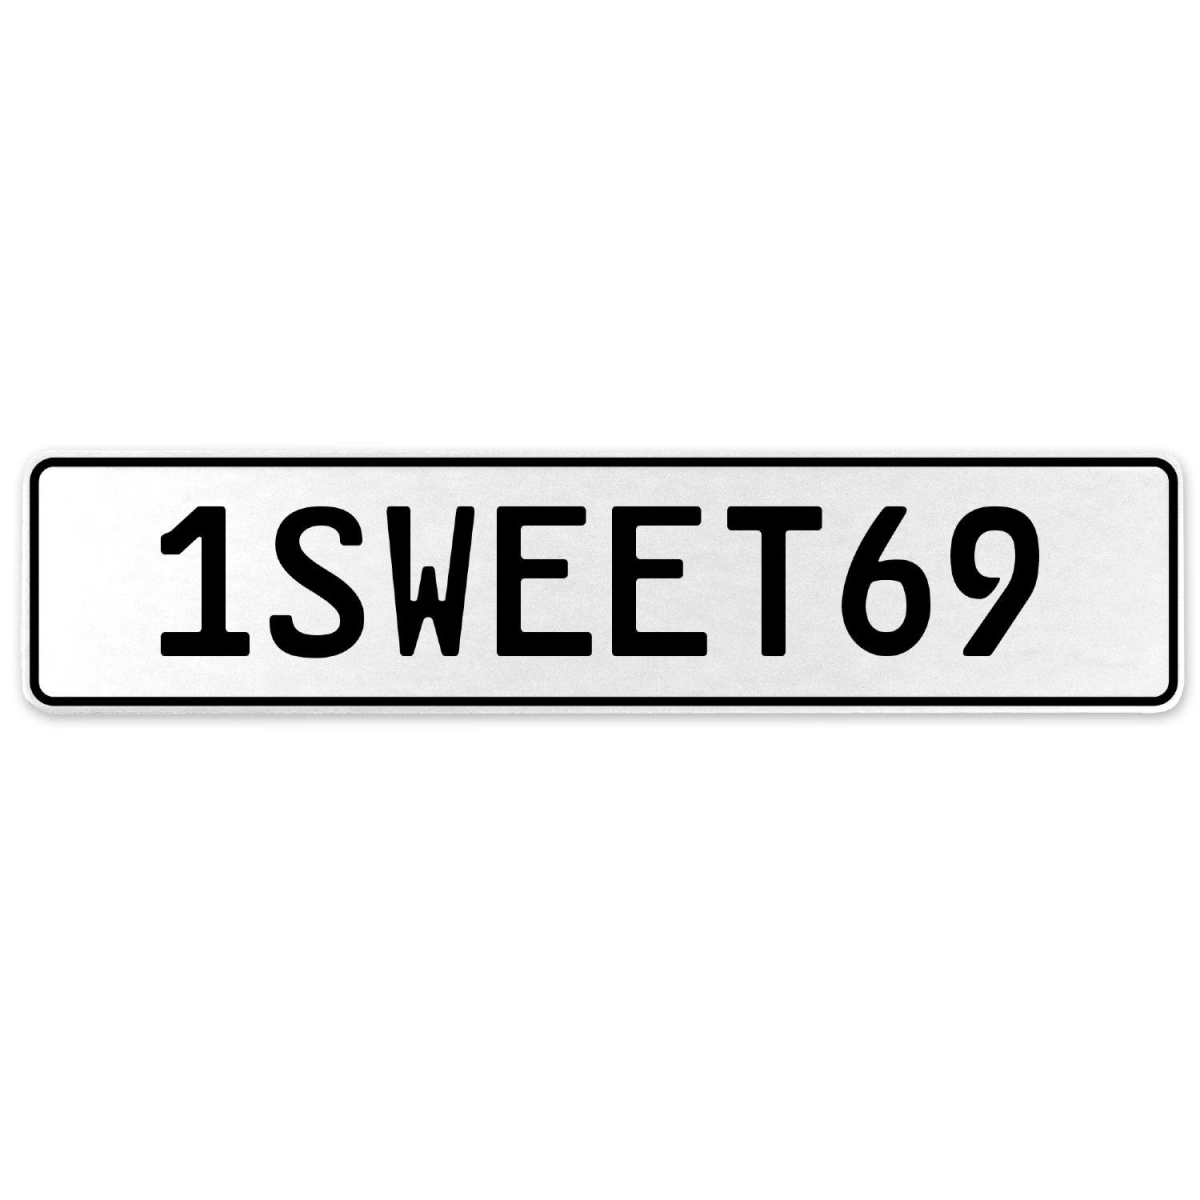 554270 1sweet69 - White Aluminum Street Sign Mancave Euro Plate Name Door Sign Wall